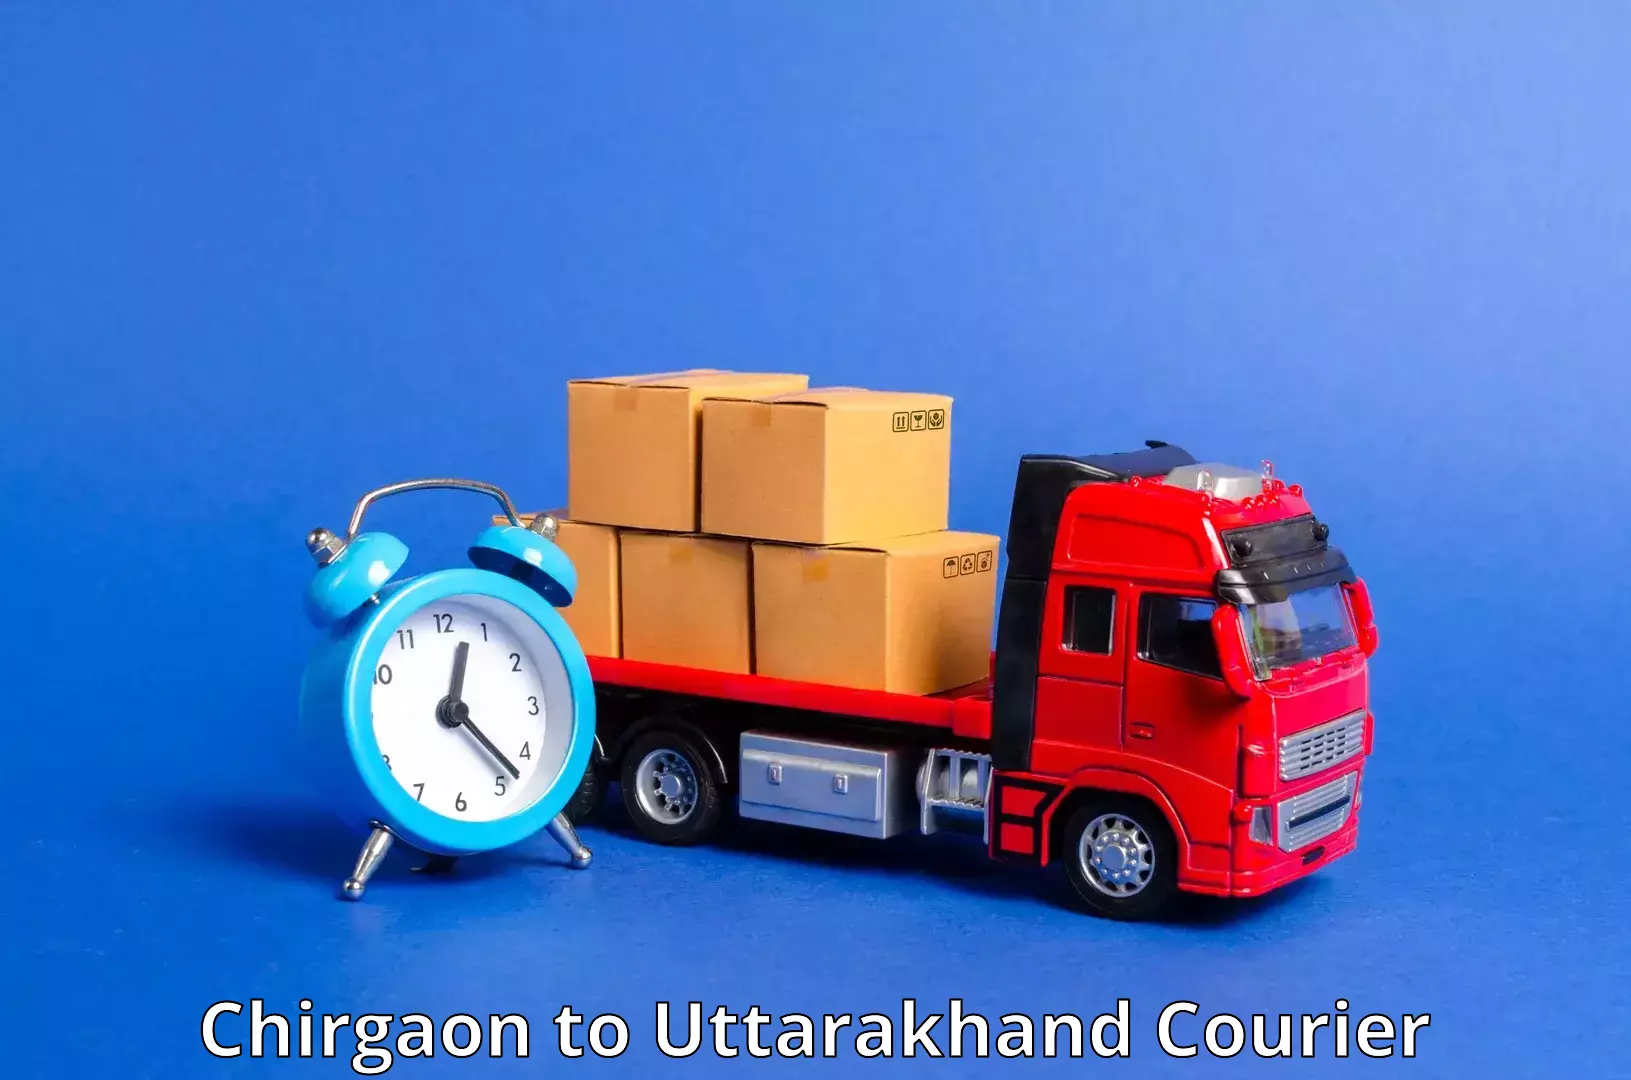 Reliable delivery network Chirgaon to Rudraprayag